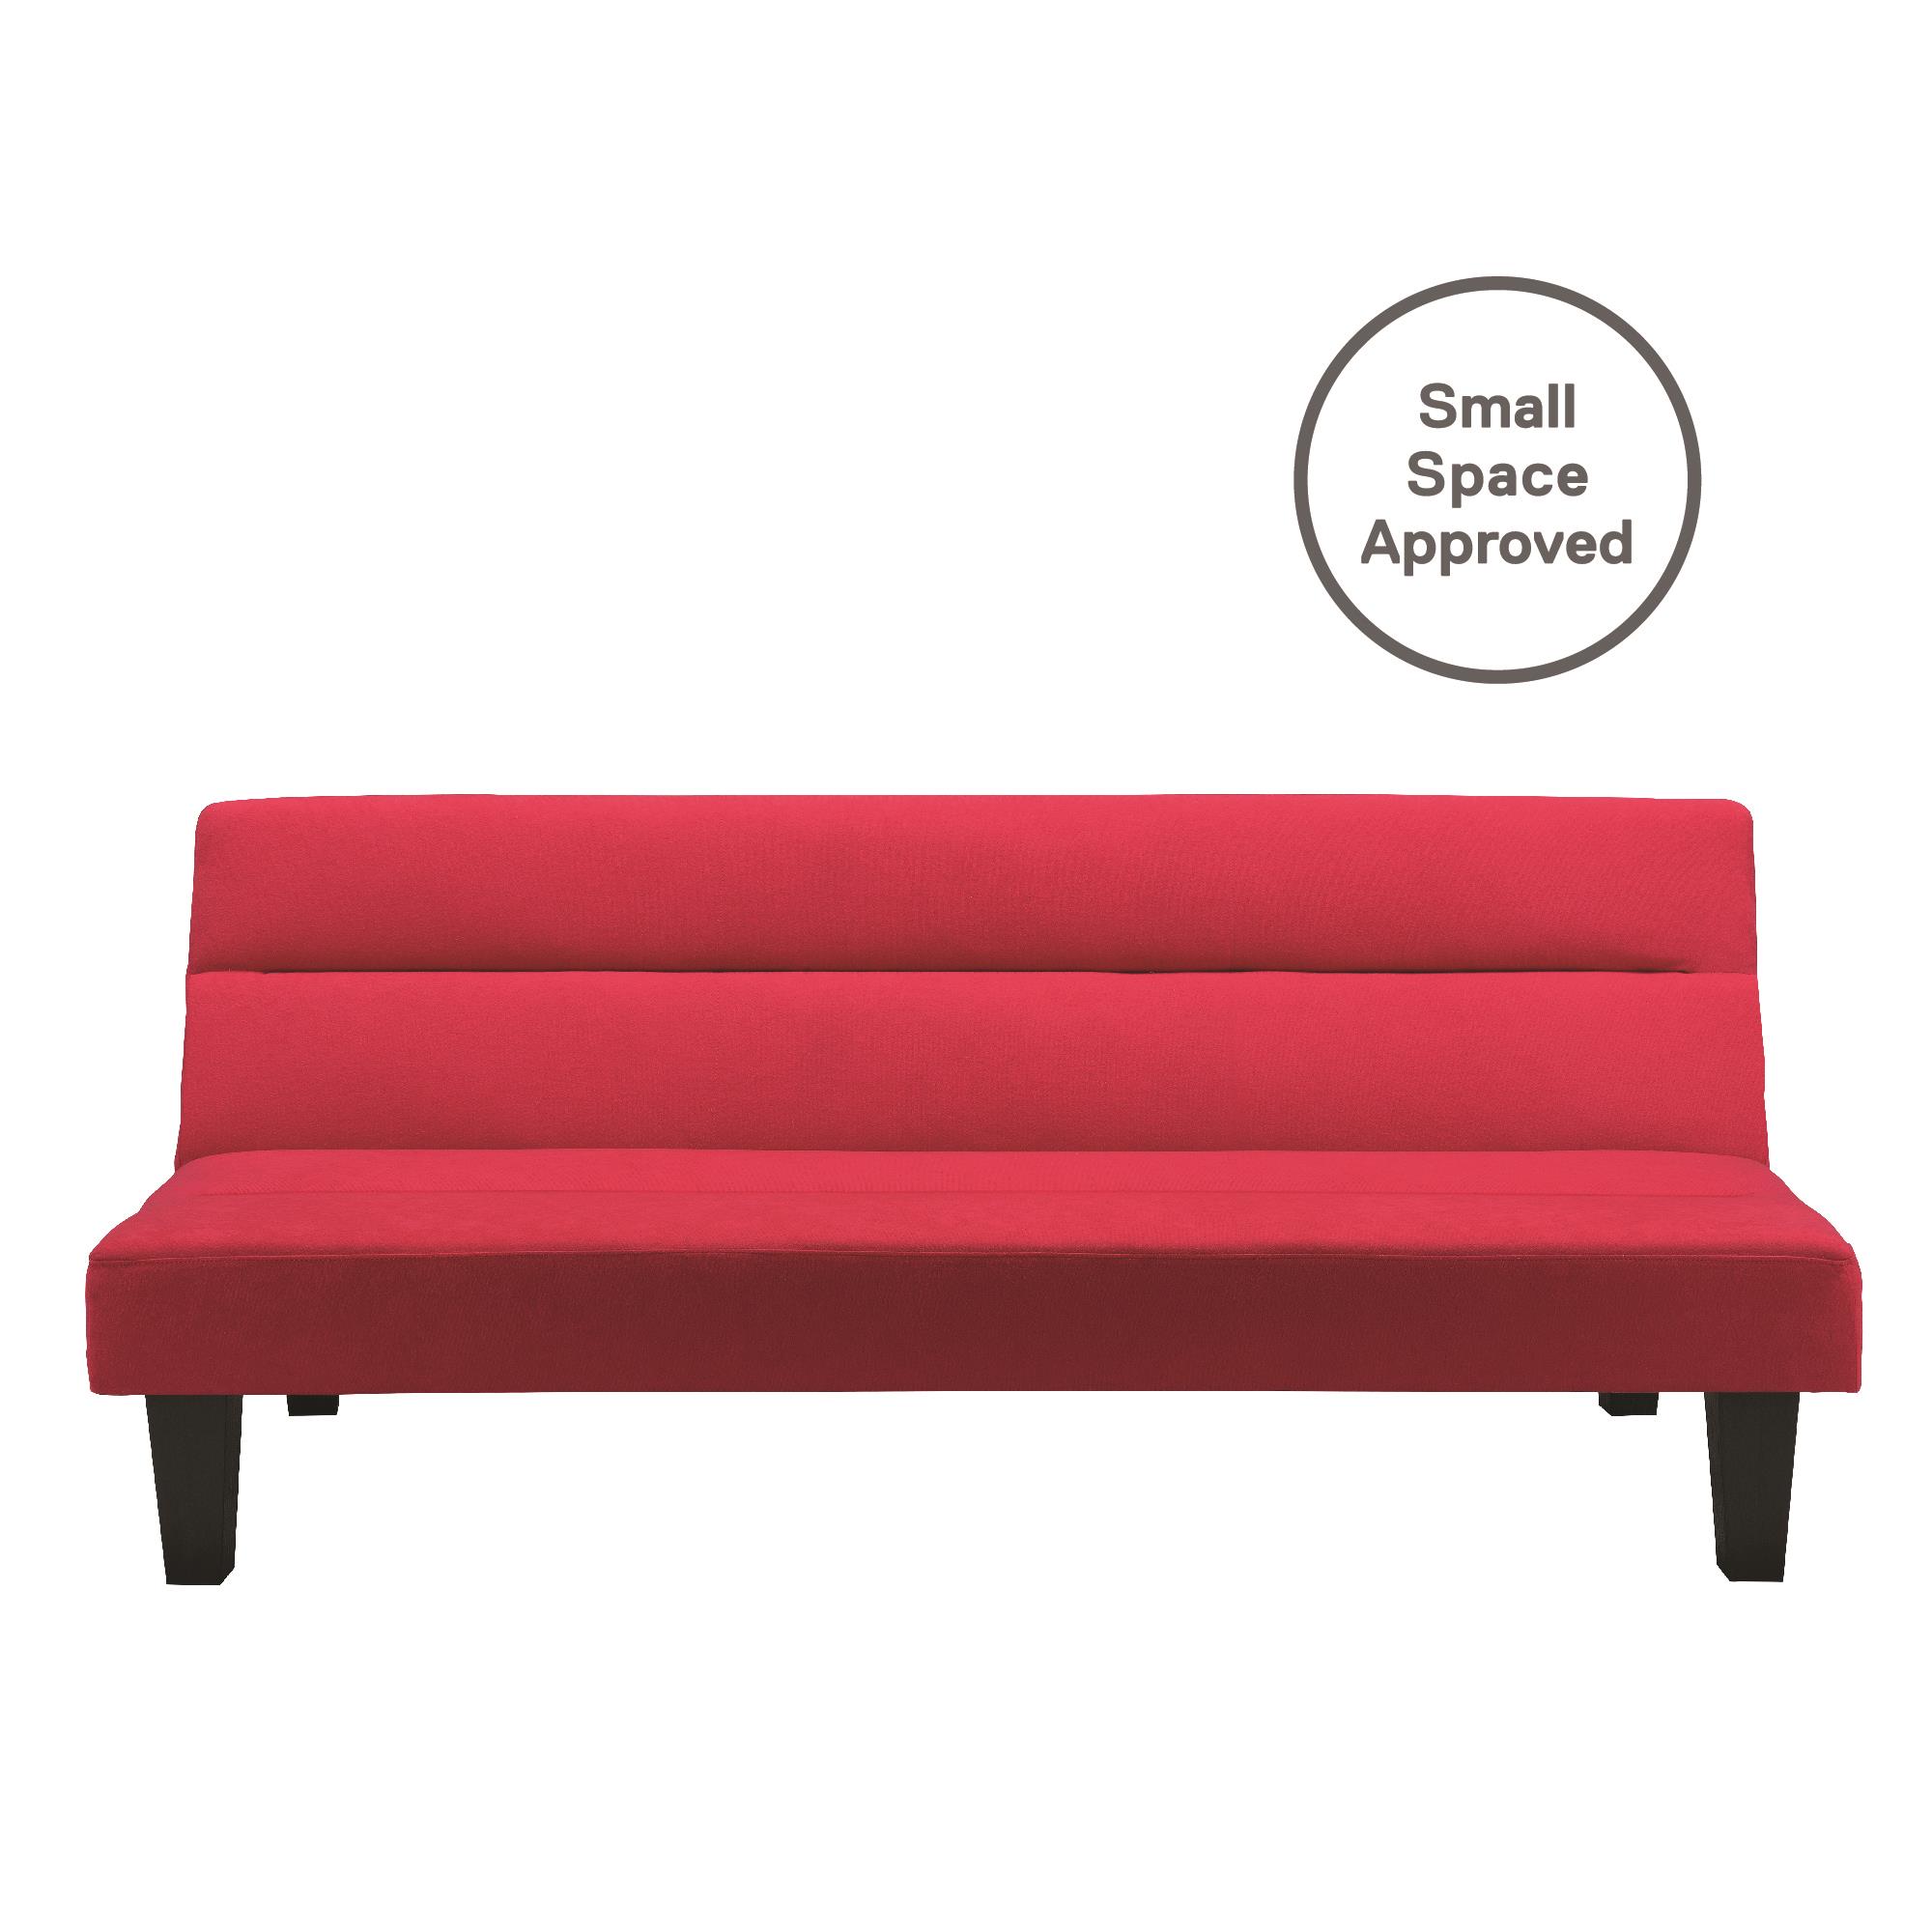 DHP Kebo Futon with Microfiber Cover, Red - image 3 of 13